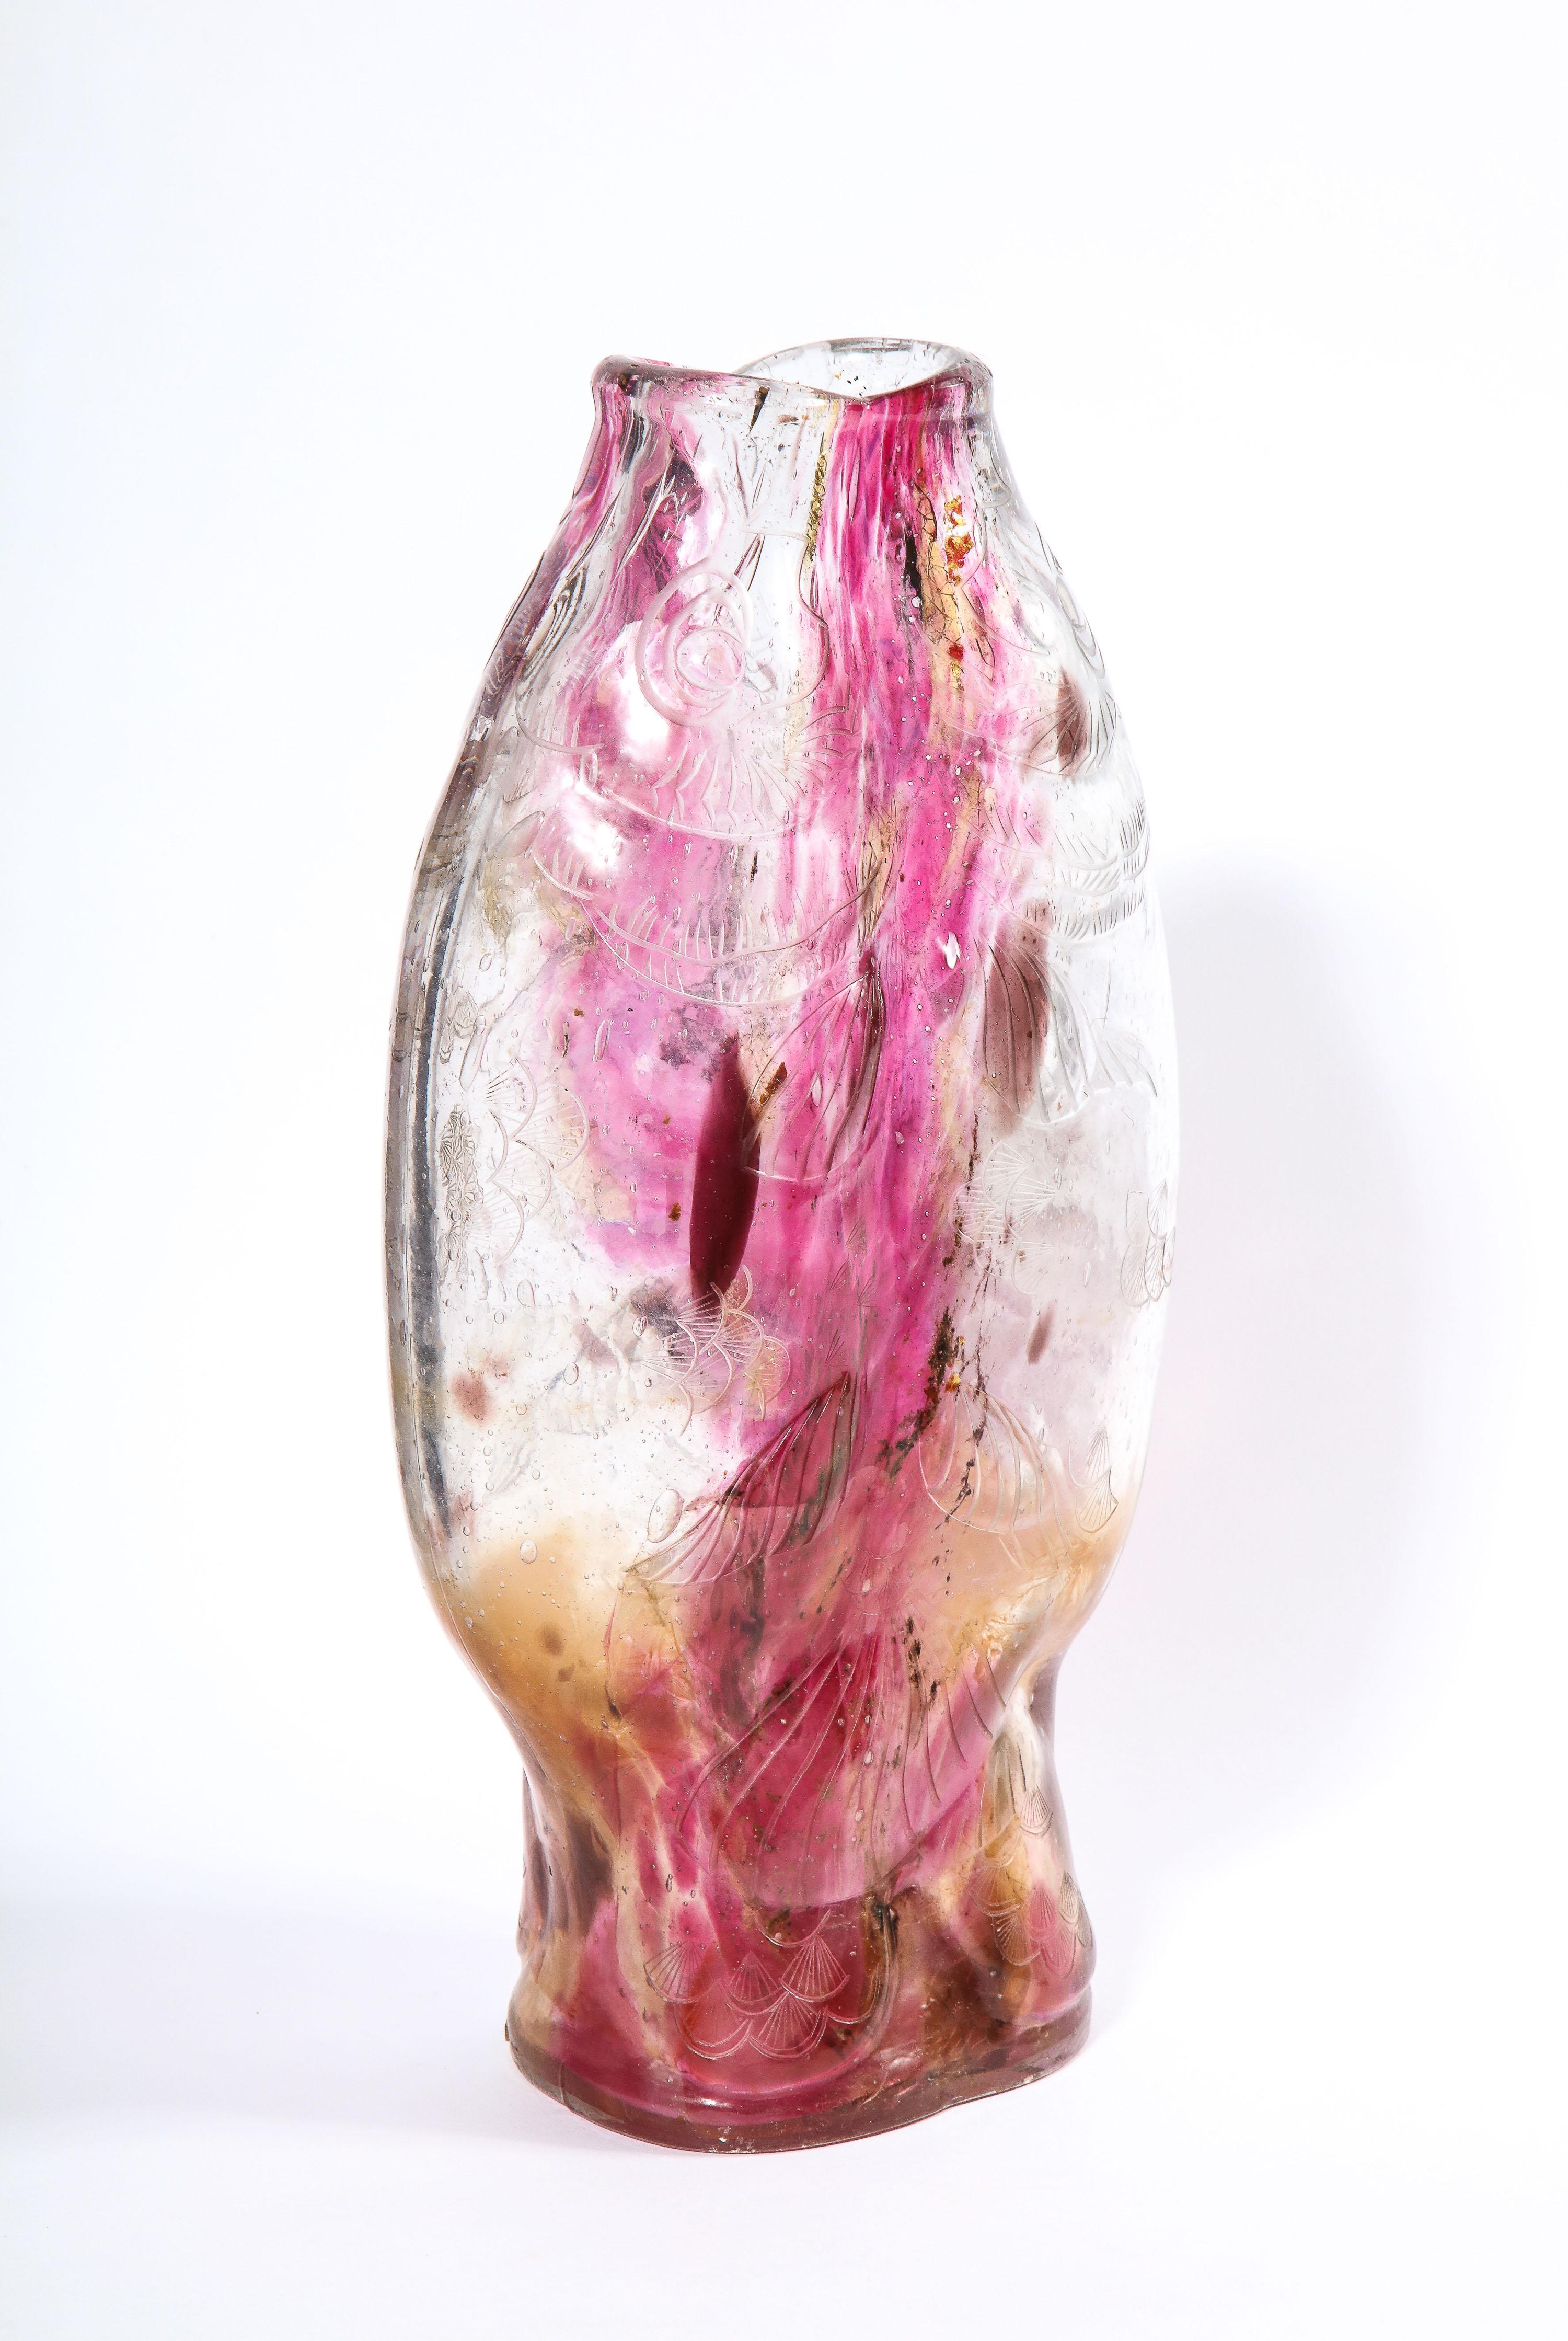 Emile Galle, A Rare & Important Ormolu-Mounted Double Carp Fish Pink-Glass Vase For Sale 5